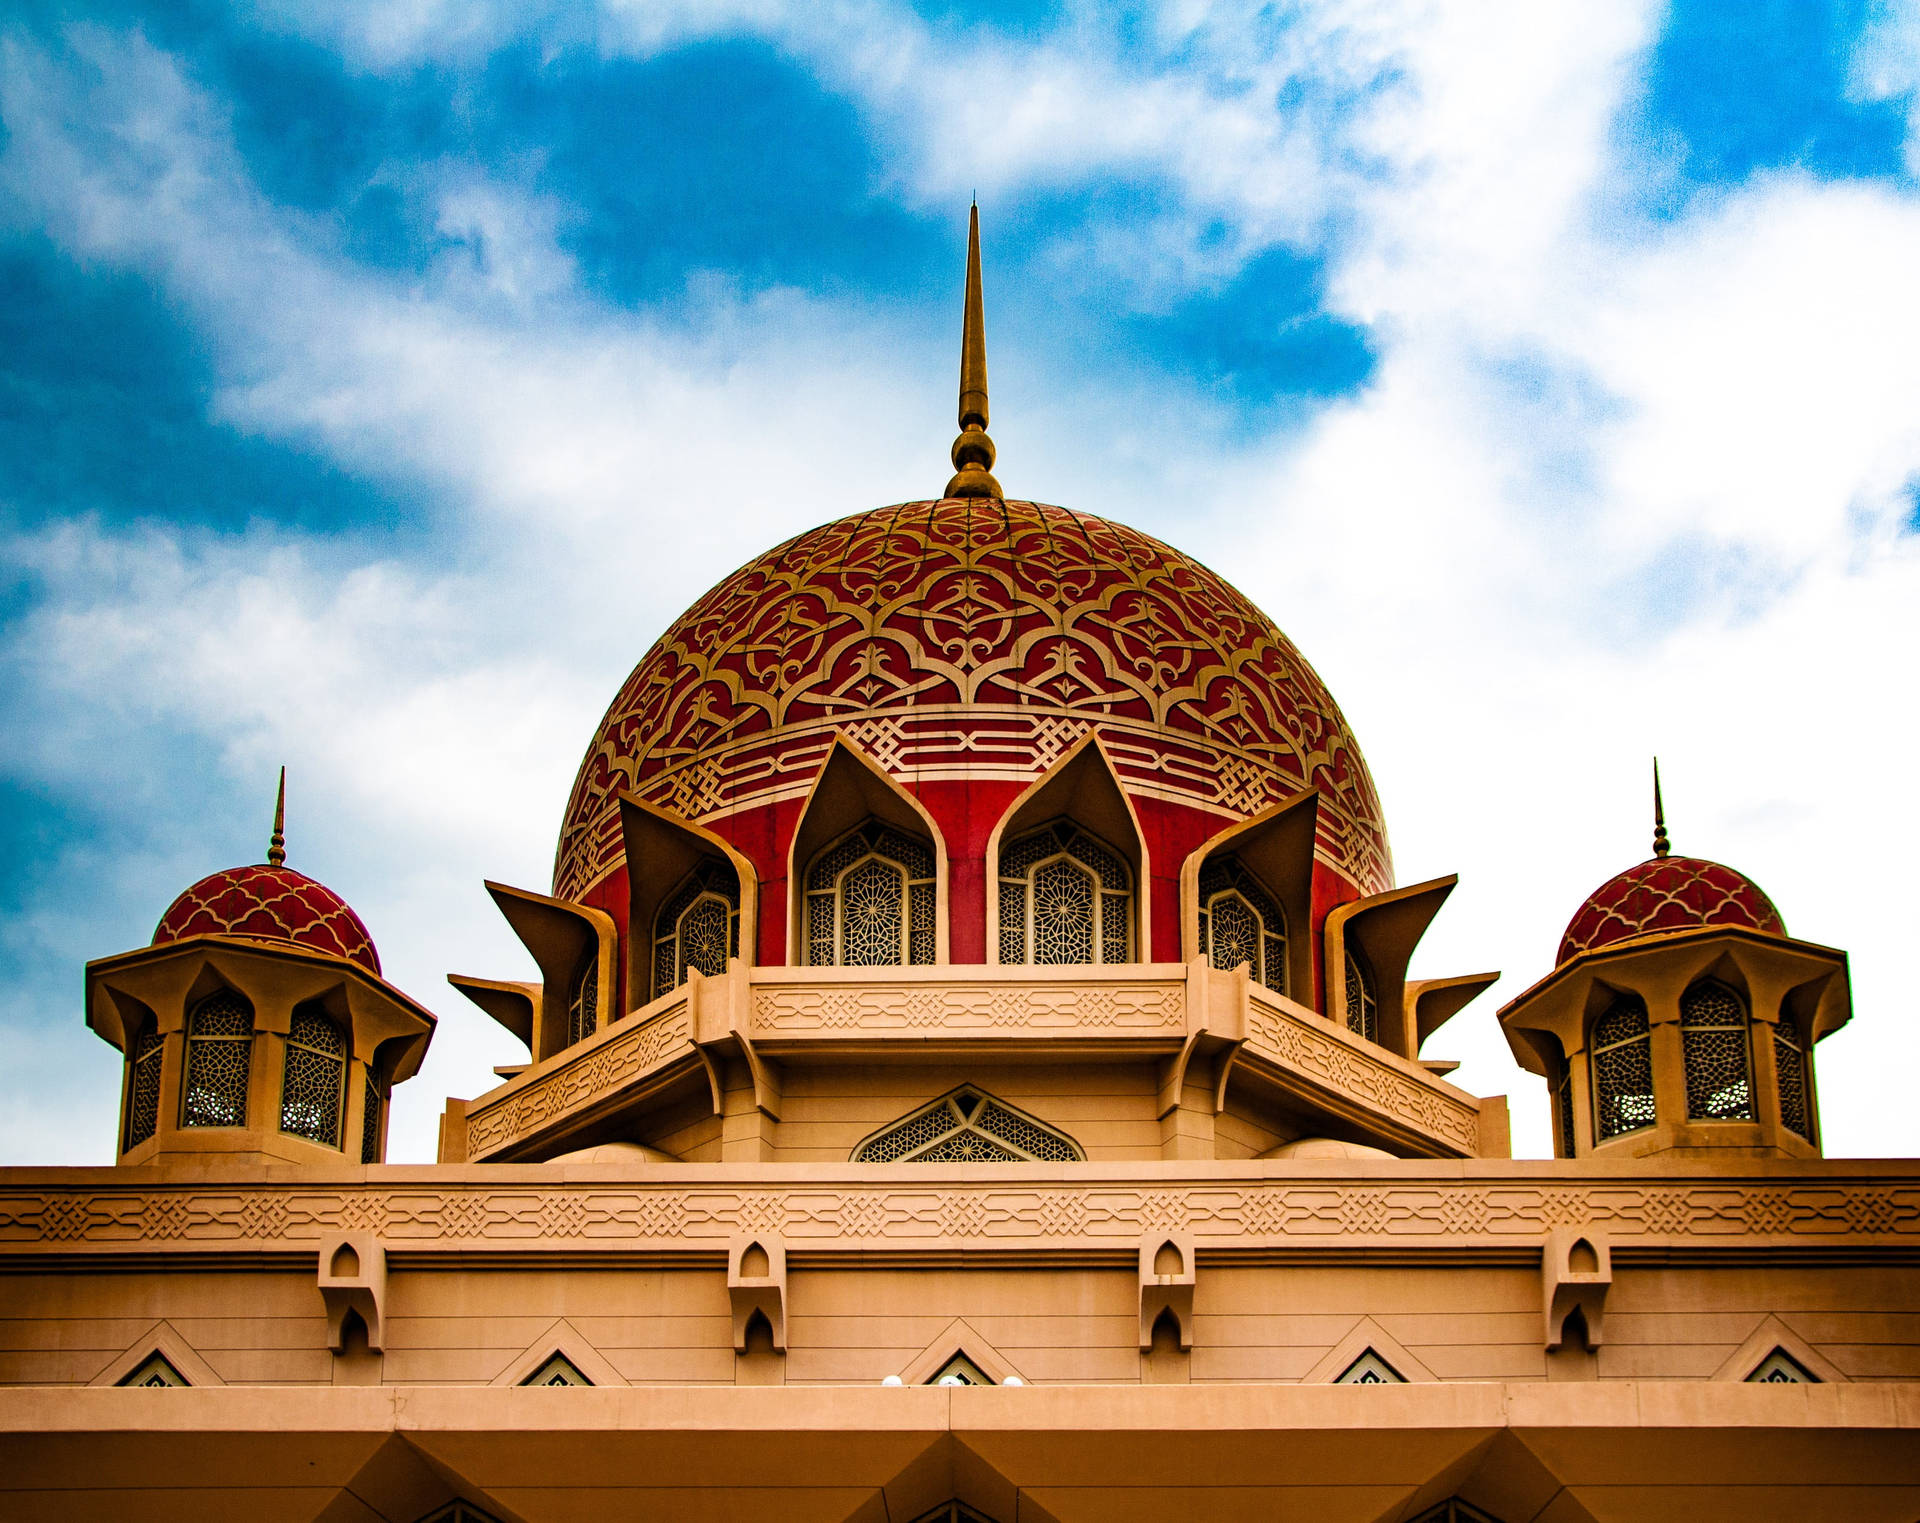 "Majestic Red Dome: A Display of Intricate Design in a Beautiful Mosque" Wallpaper